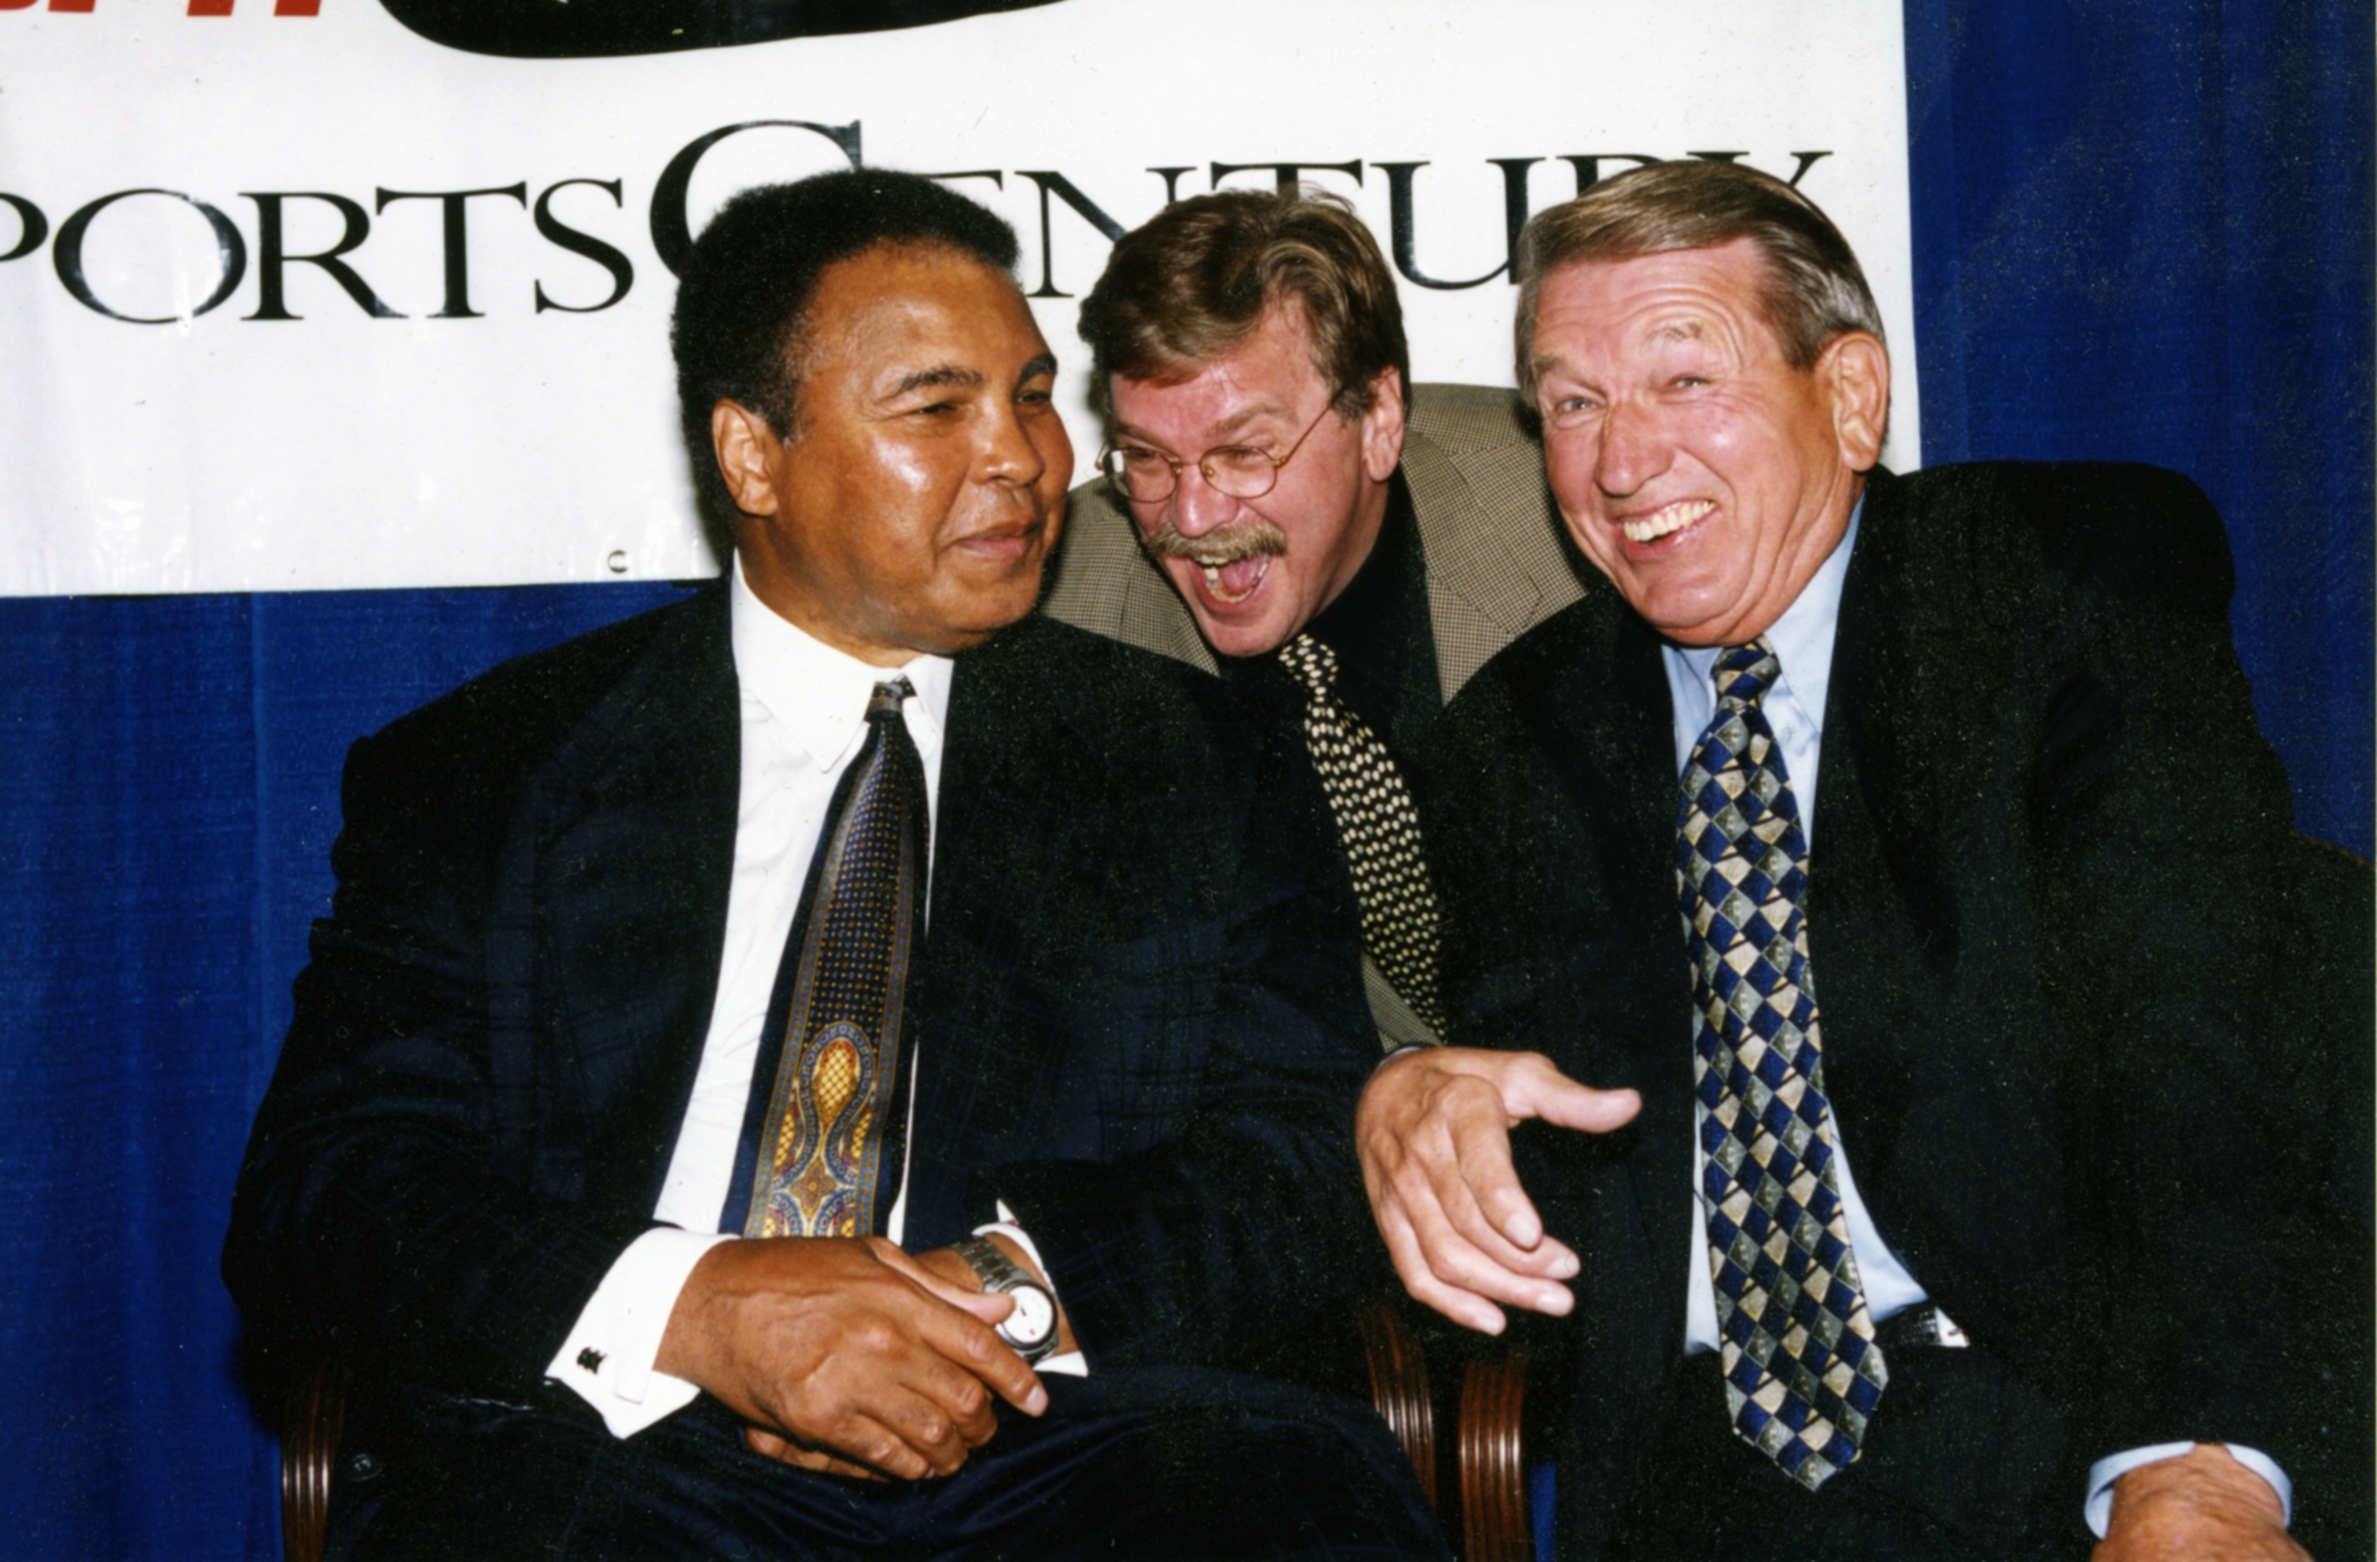 At ESPN Sport Century Event at the U.S. Capitol in Washington, D.C., with Mohammed Ali and Johnny Unitas.